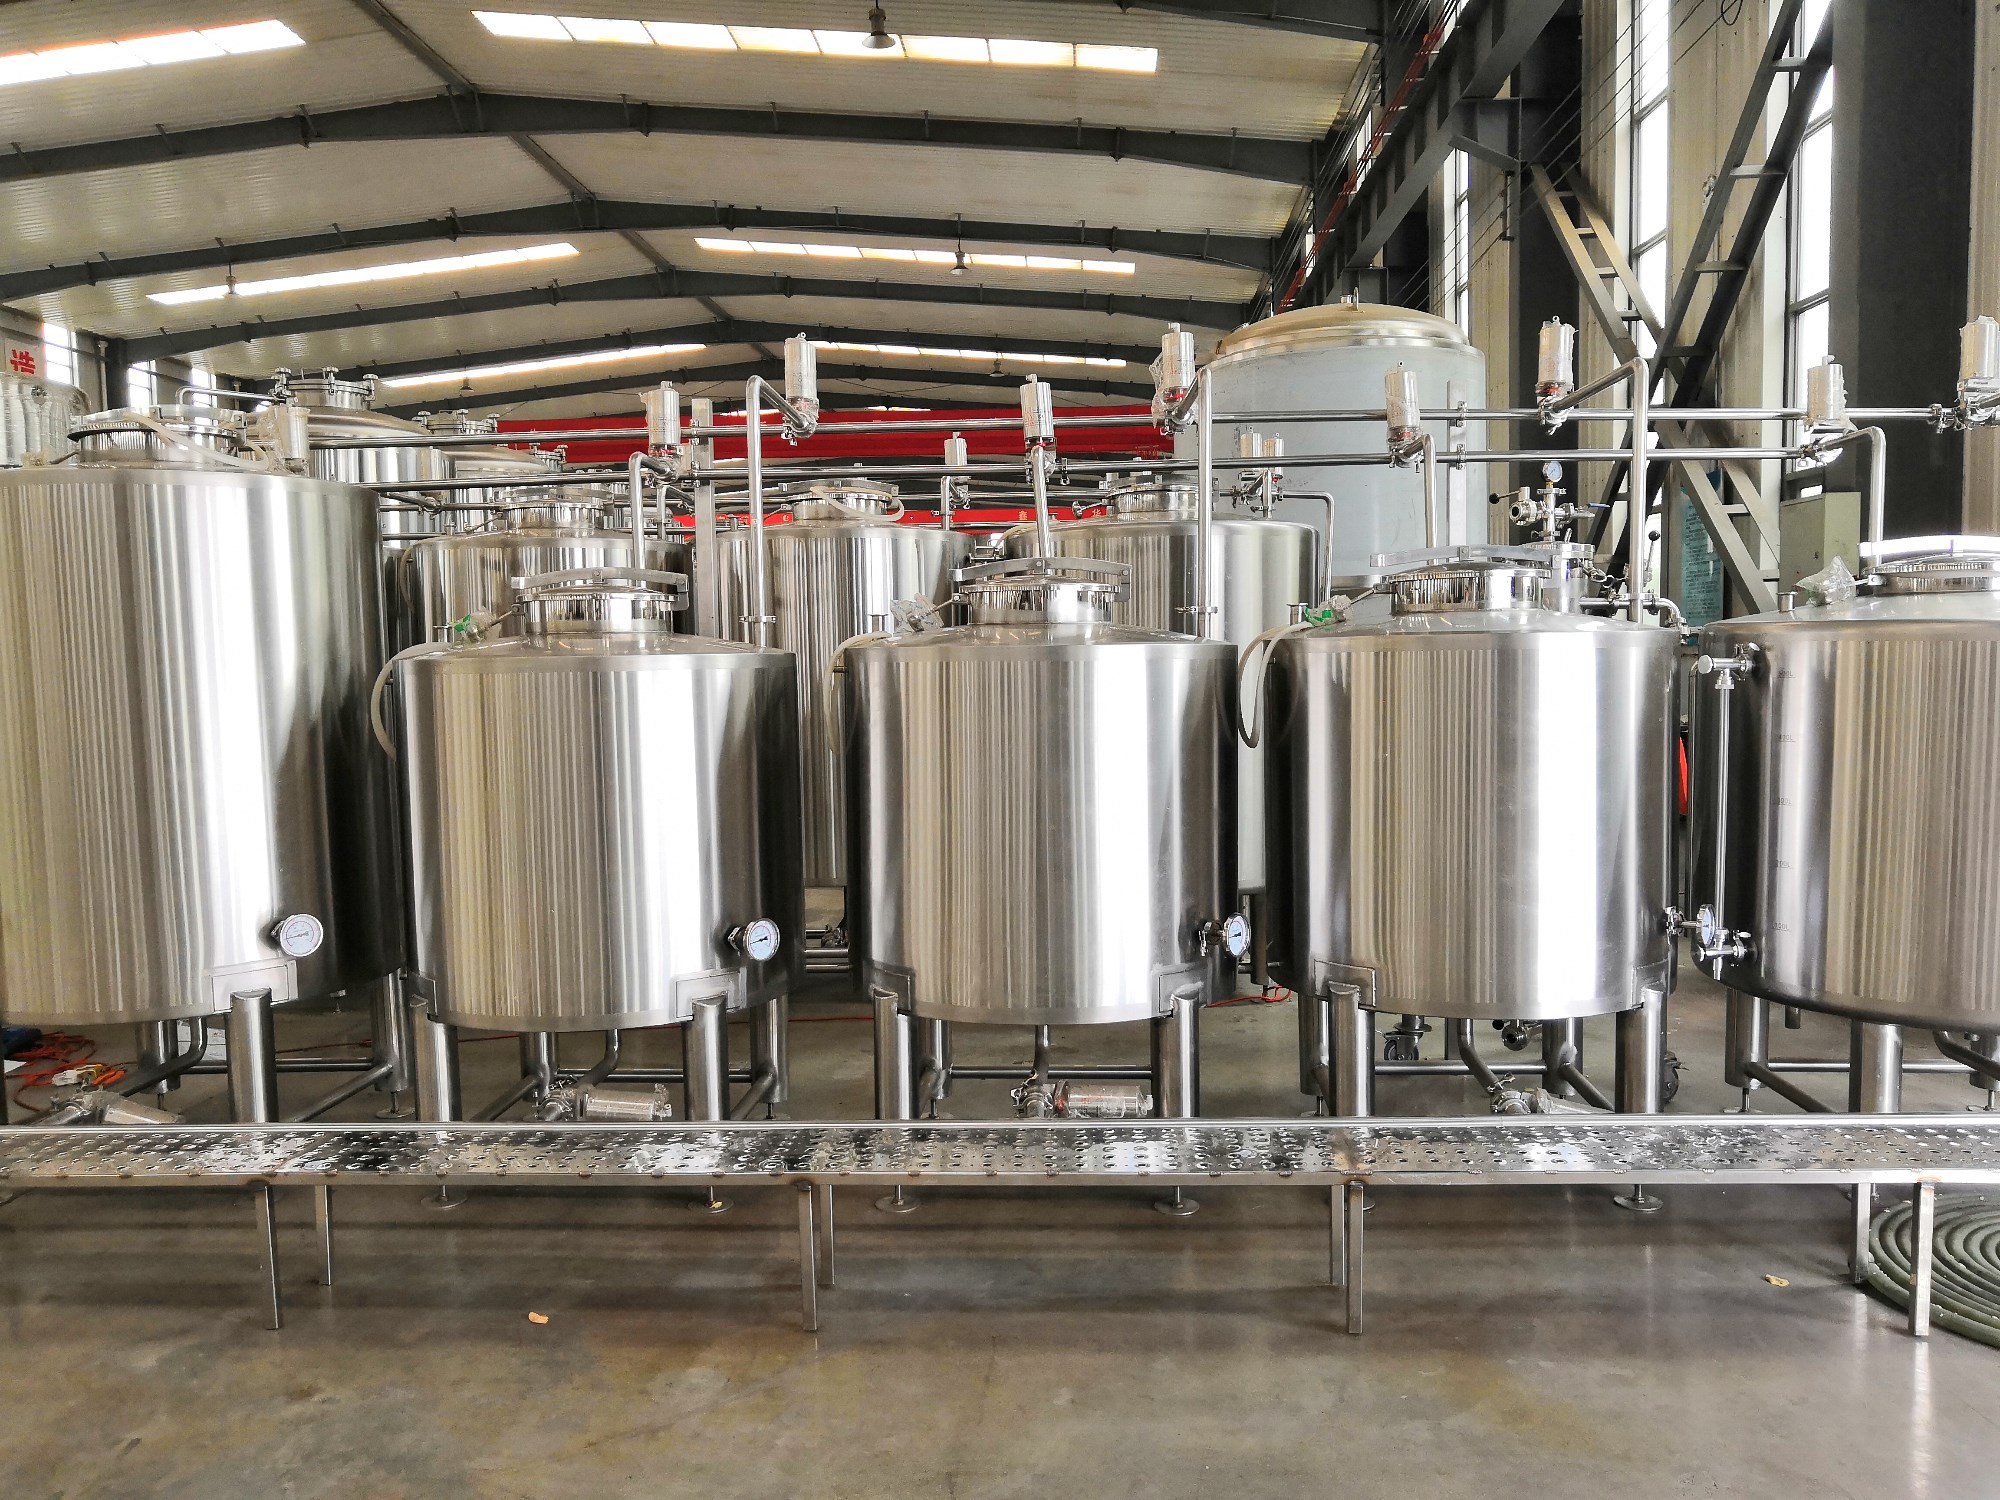 Mini beer brewing equipment beer brewery system brewery plant